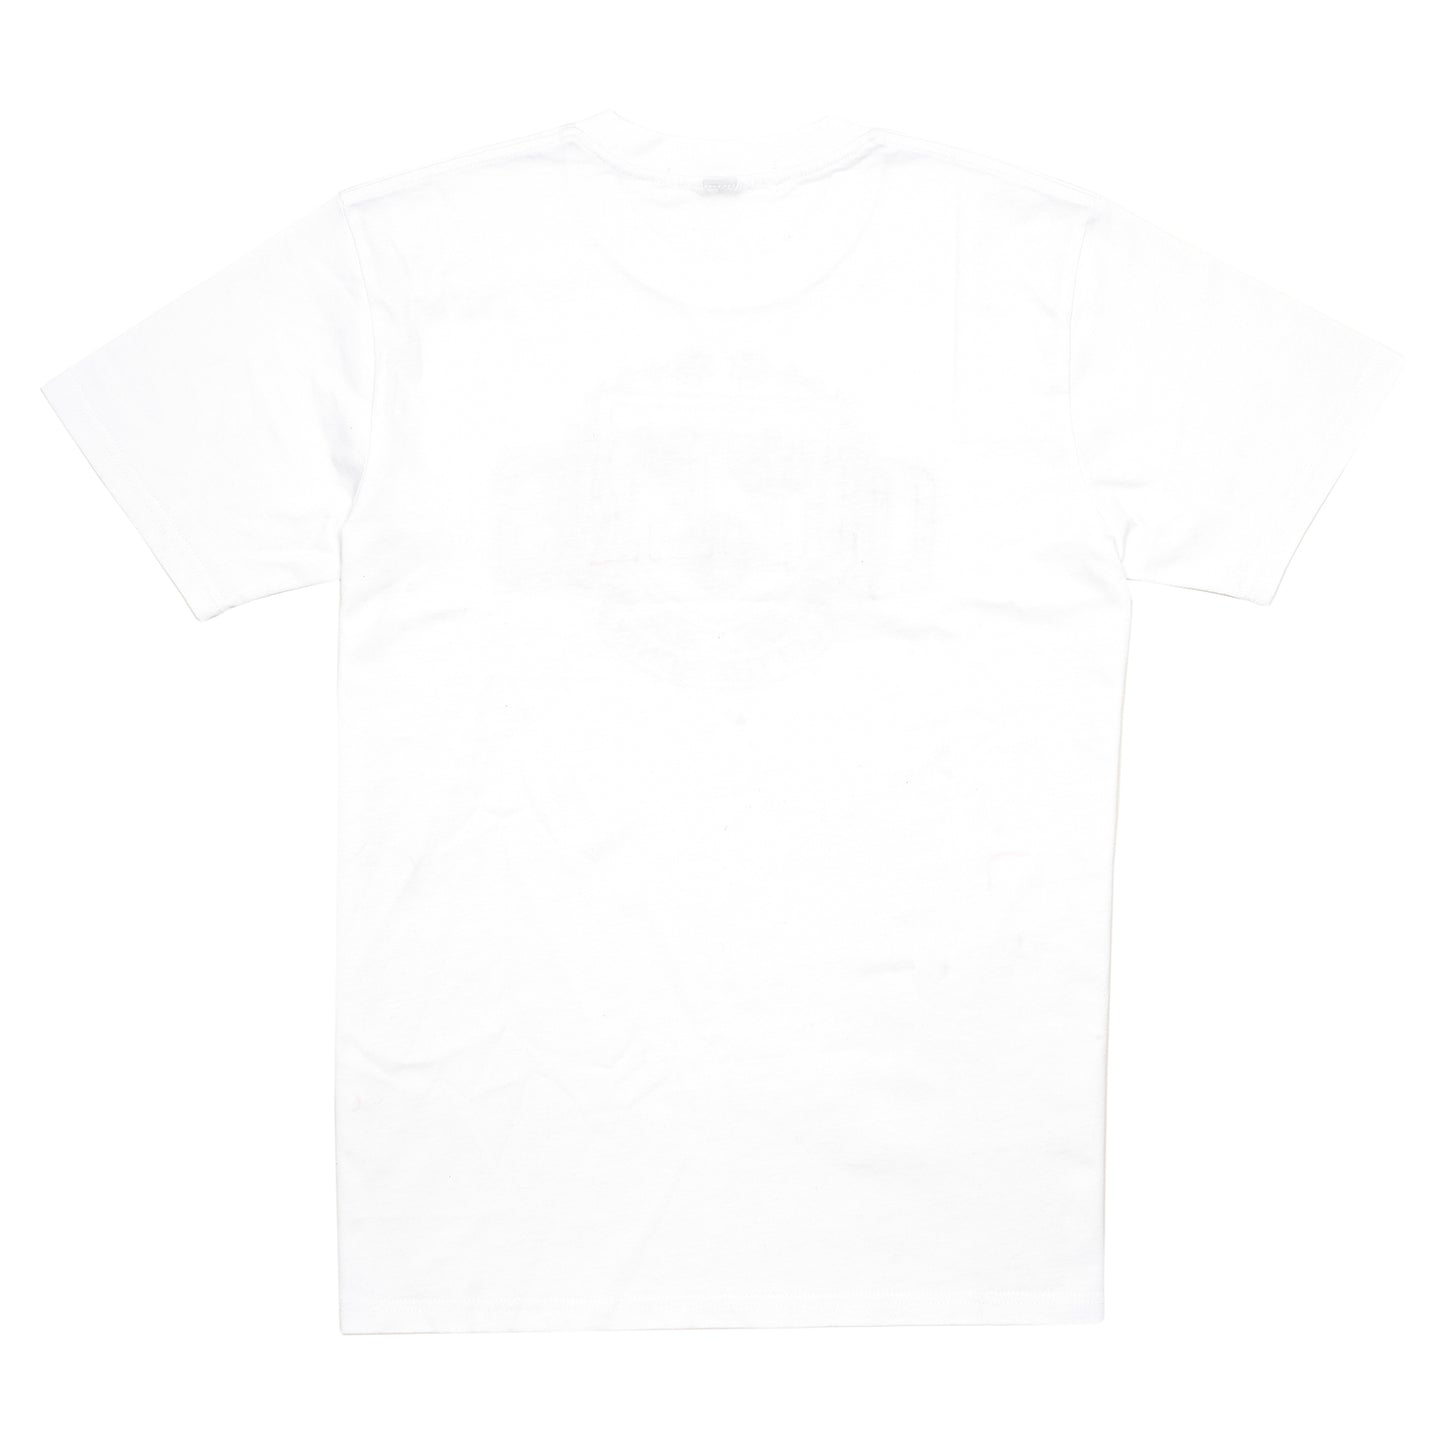 Queens Get The Money Patch Twill Tee - White